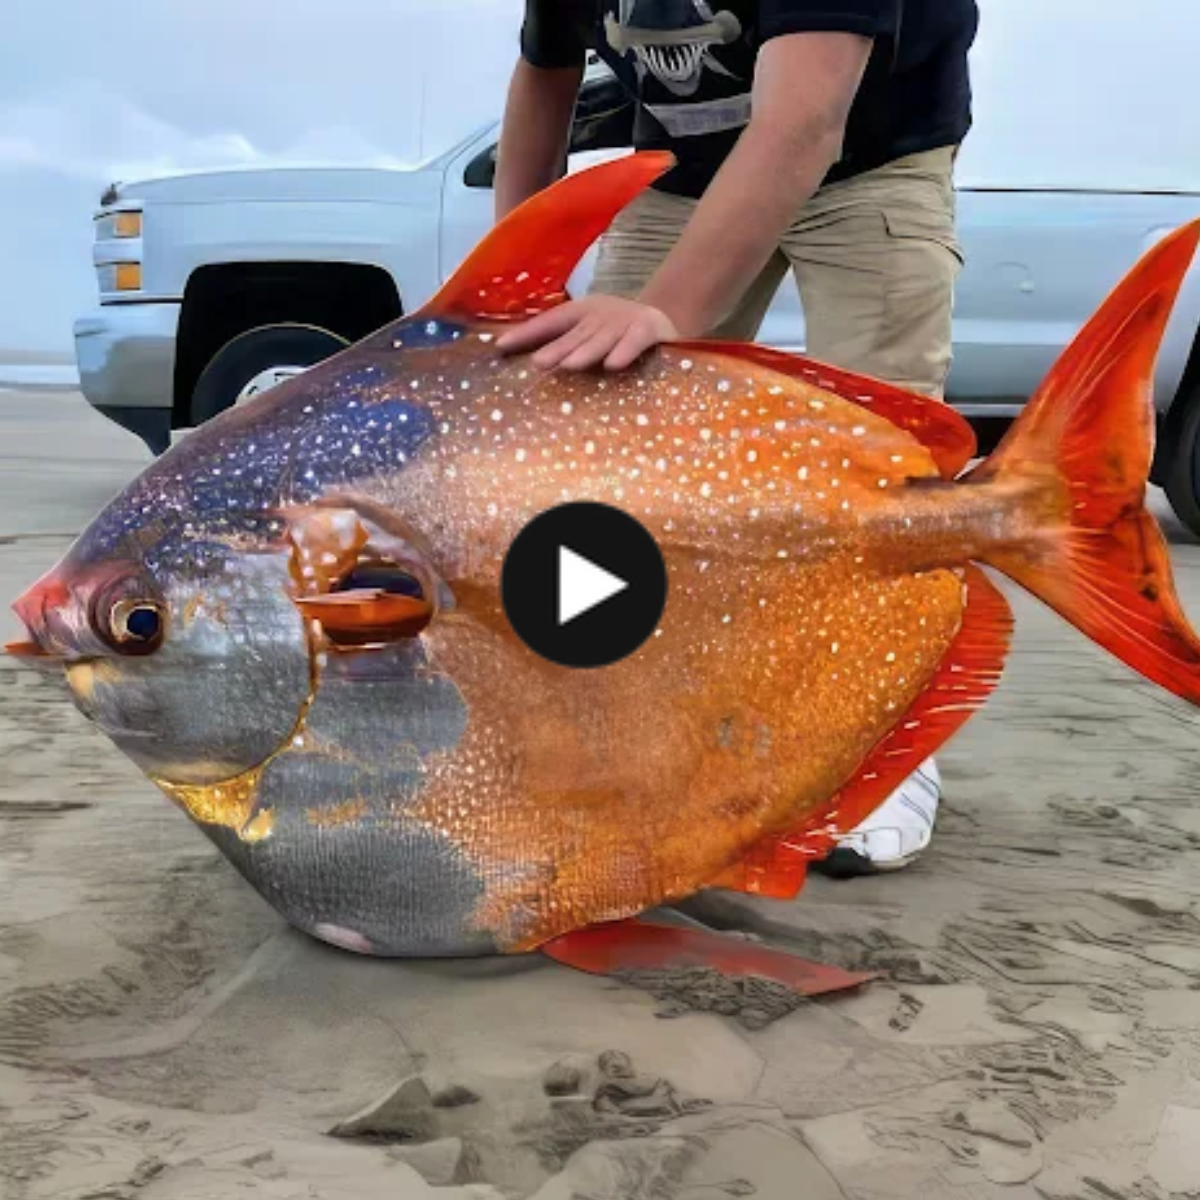 The massive 100-pound moonfish that was found in Seaside, Oregon, is said to be a sign of climate change by experts.